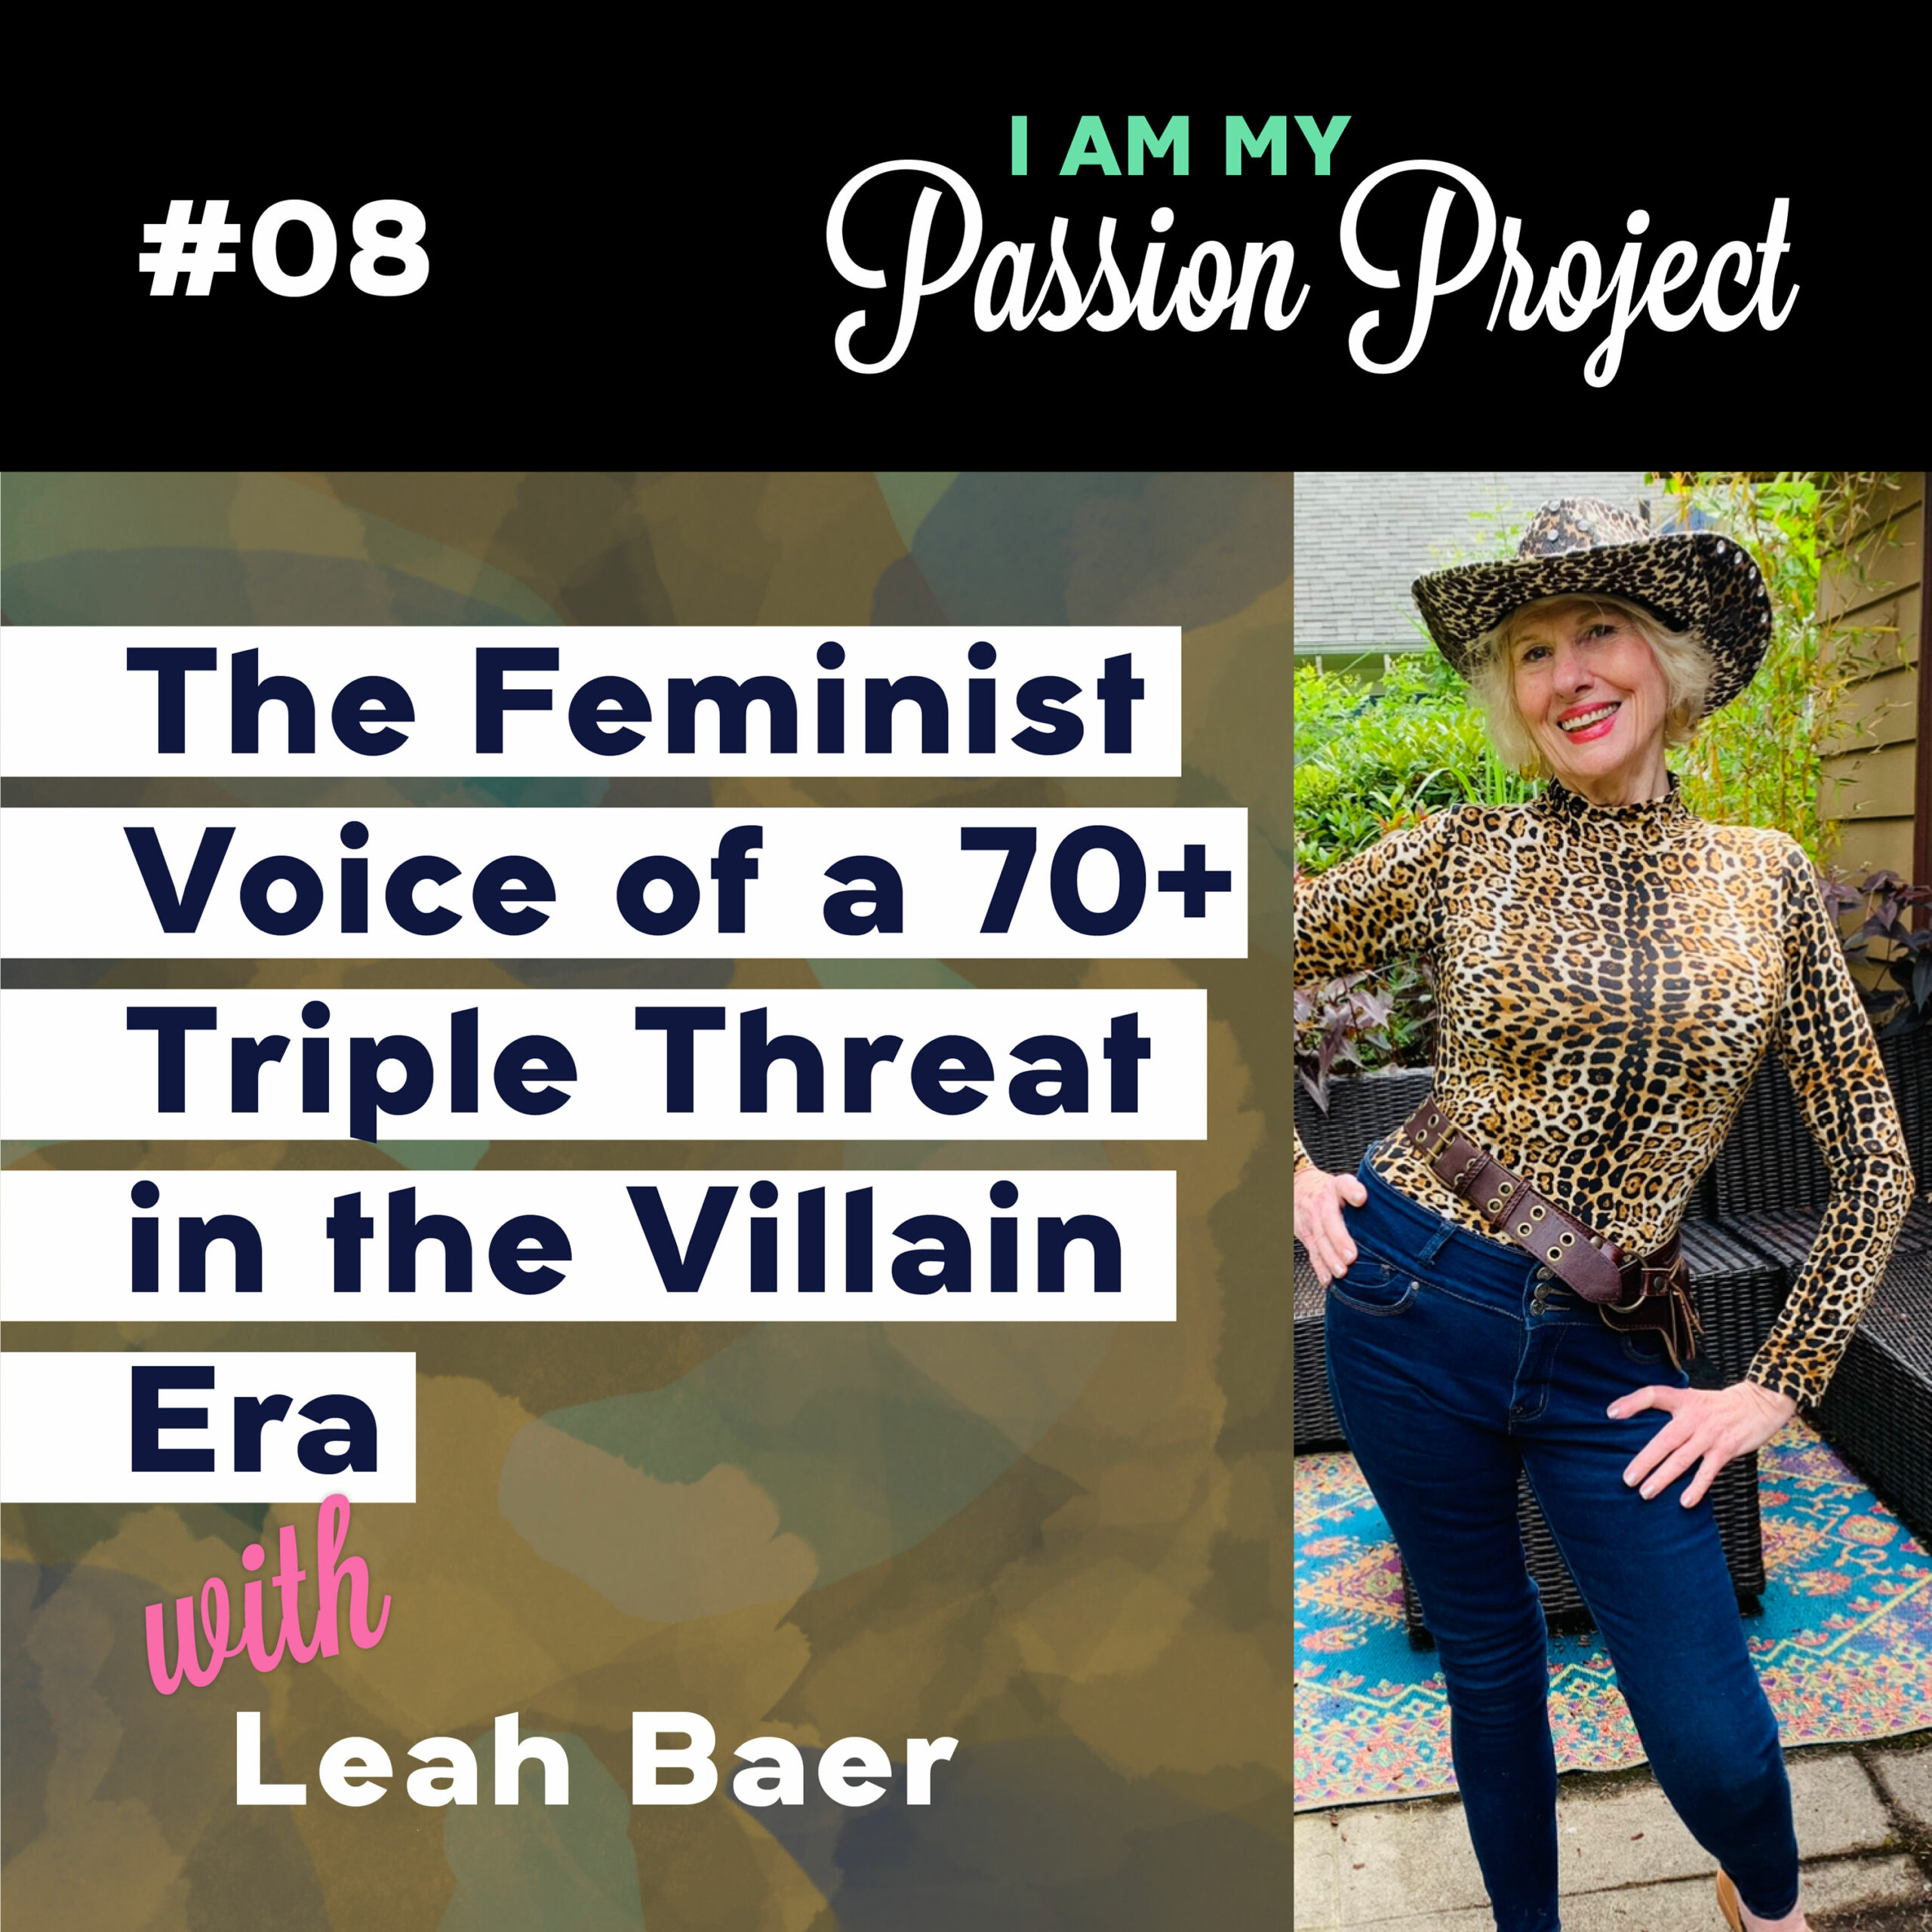 The Feminist Voice of a 70+ Triple Threat in the Villian Era, with Leah Baer